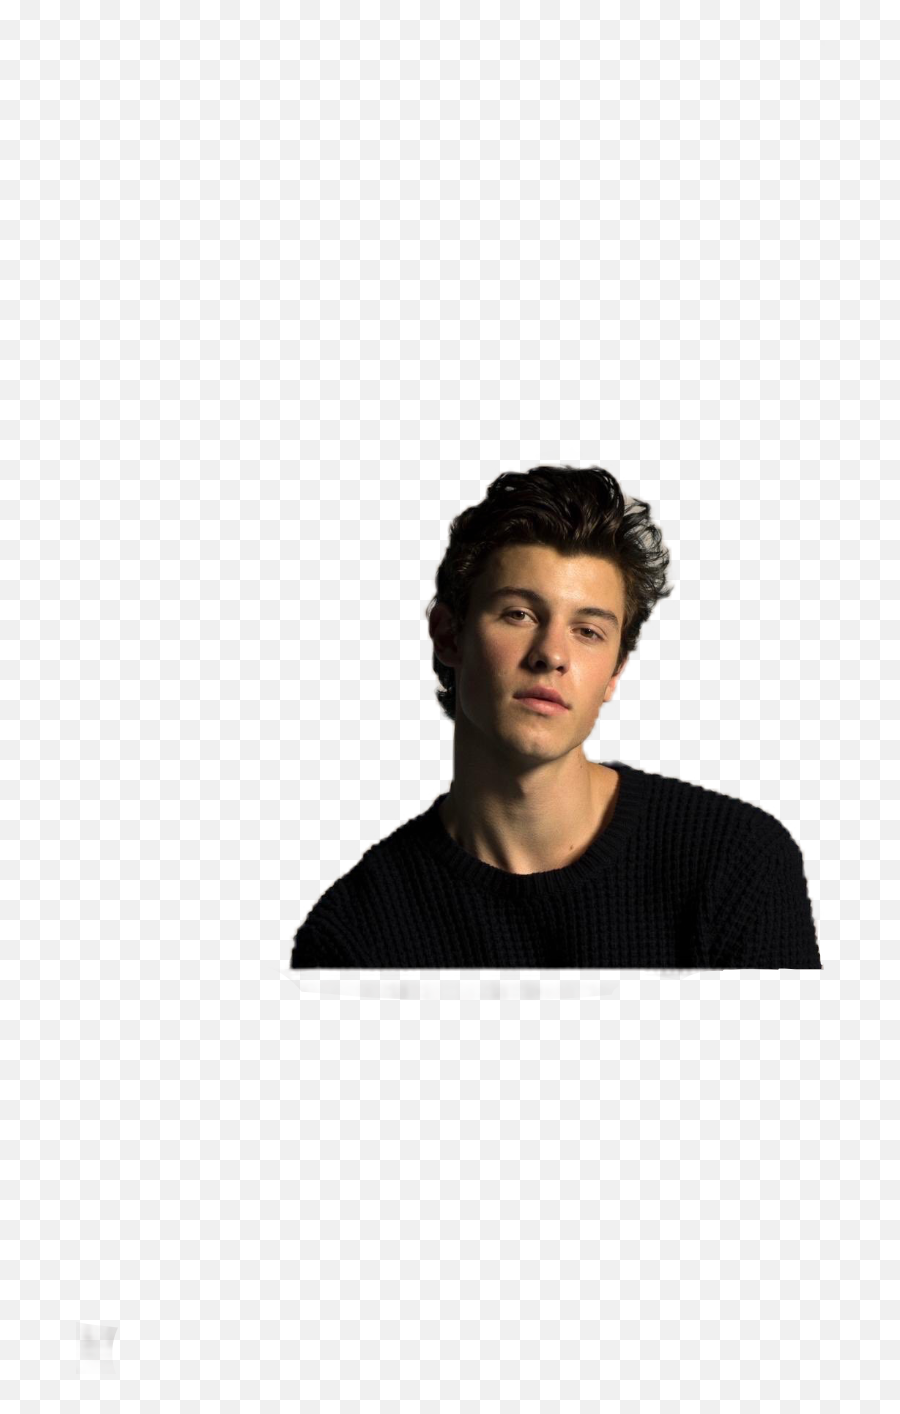 Sm3 Shawnmendes Mendesarmy Shawn Mendes Inmyblood Losti - Shawn Mendes Transparent Png 2019,Shawn Mendes Png